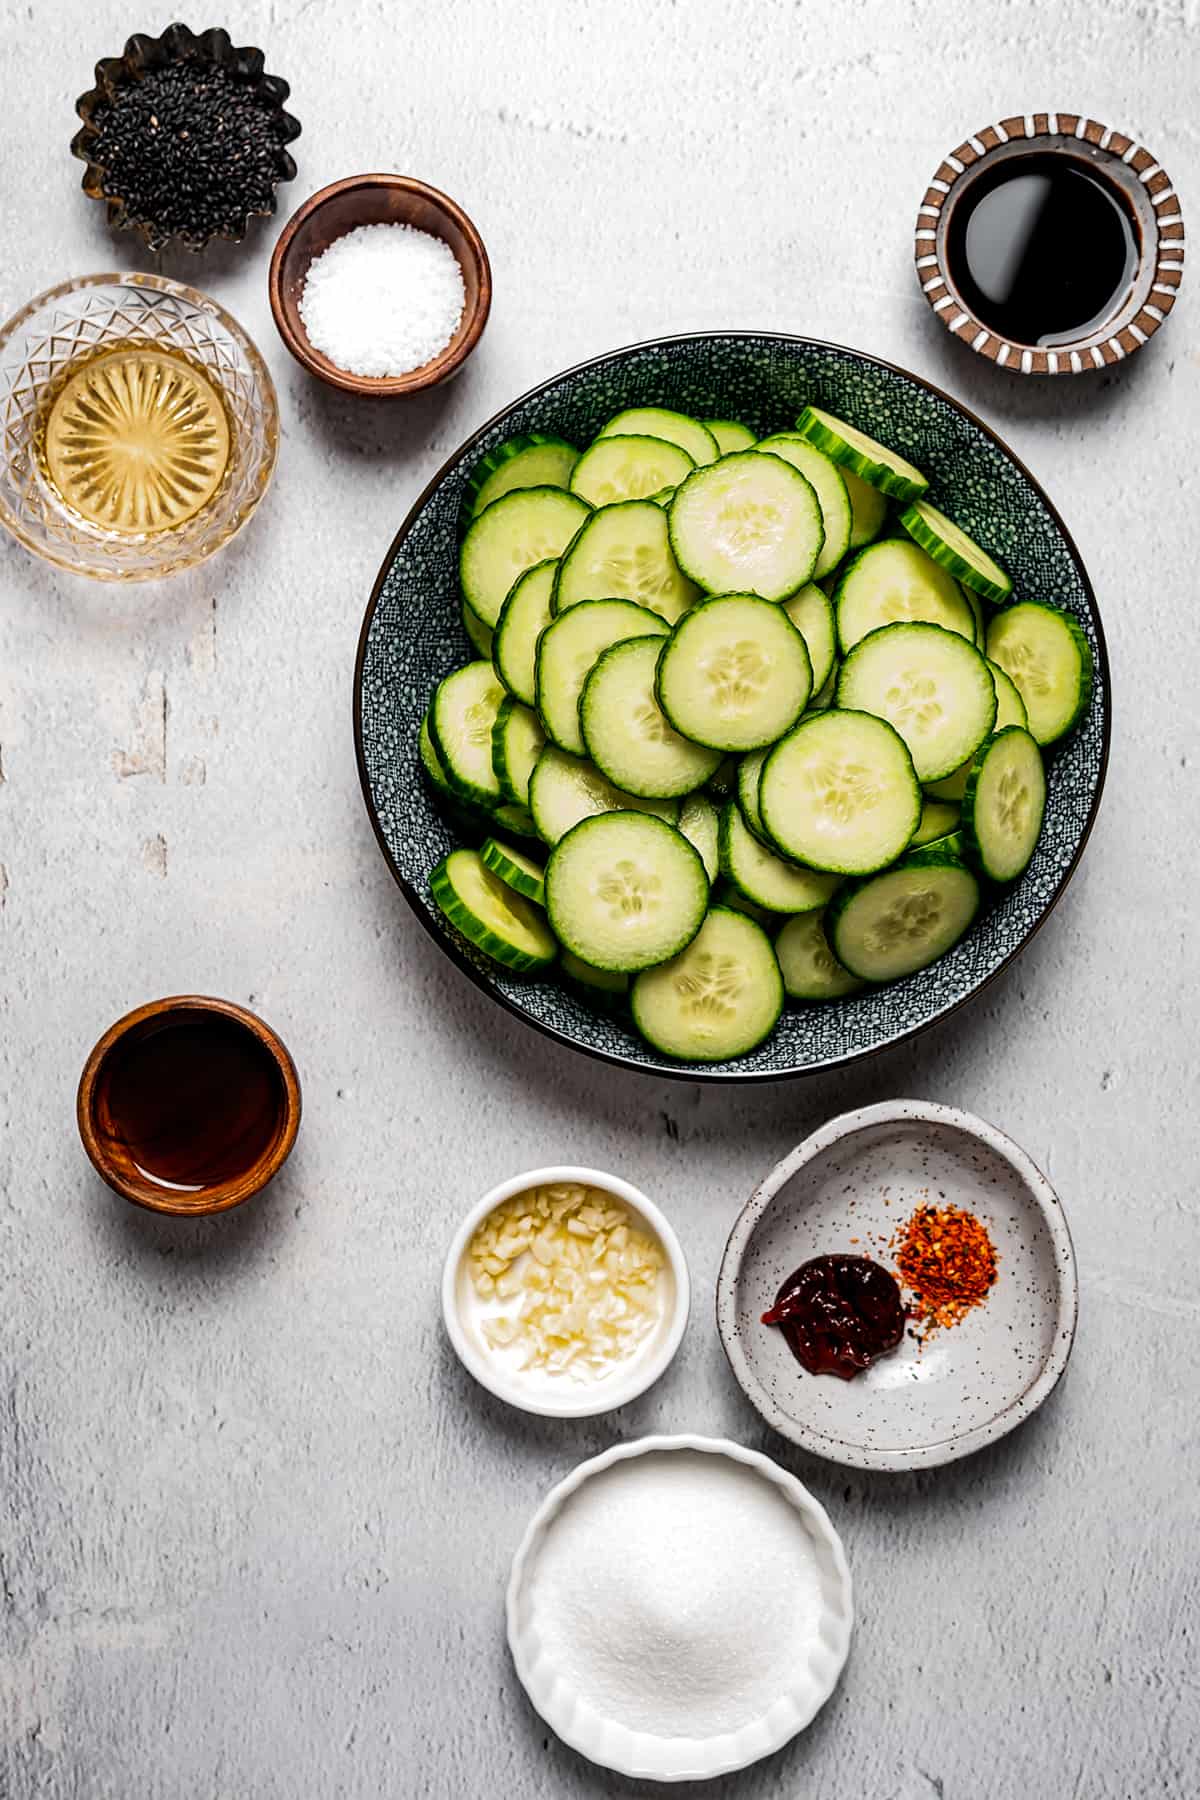 Ingredients for Asian cucumber salad.